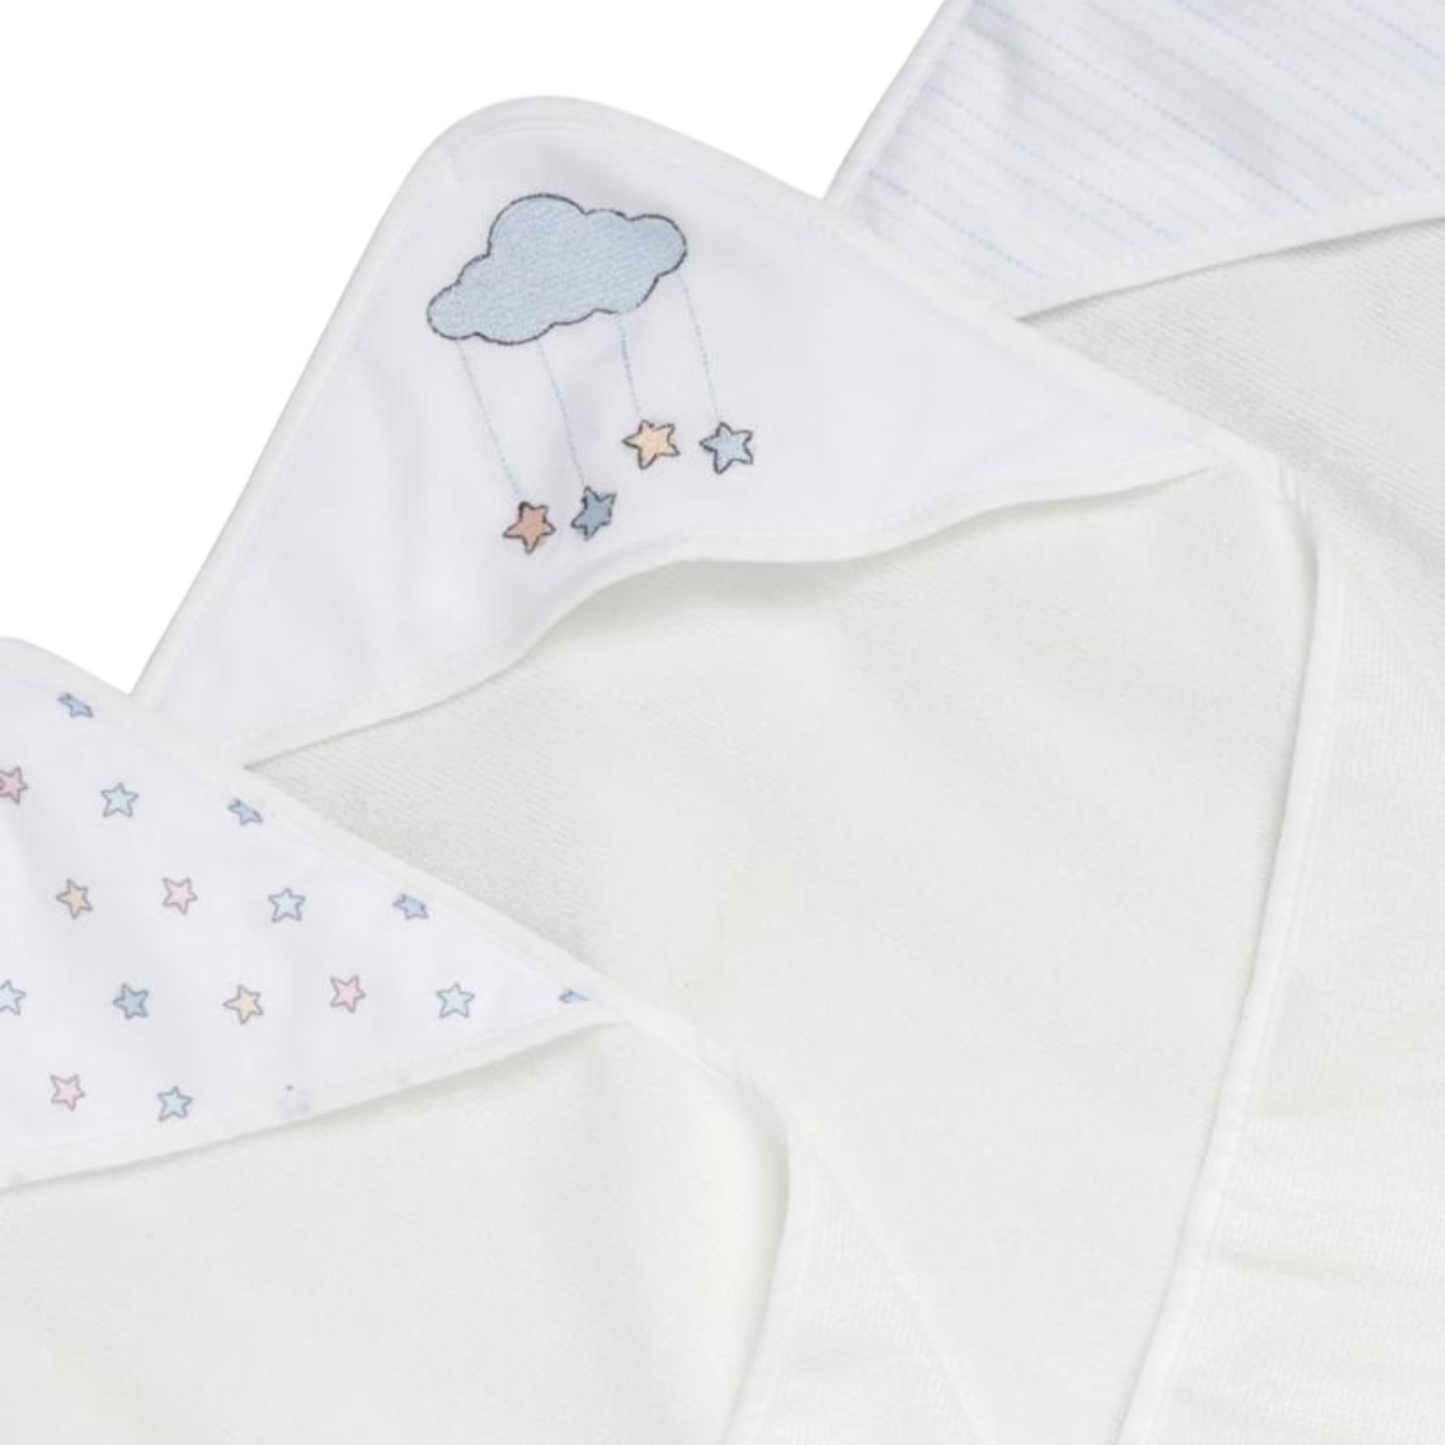 Hooded baby towels and wash set, included 3 hooded baby towels with assorted star and cloud print on the hood and 3 baby face cloths.